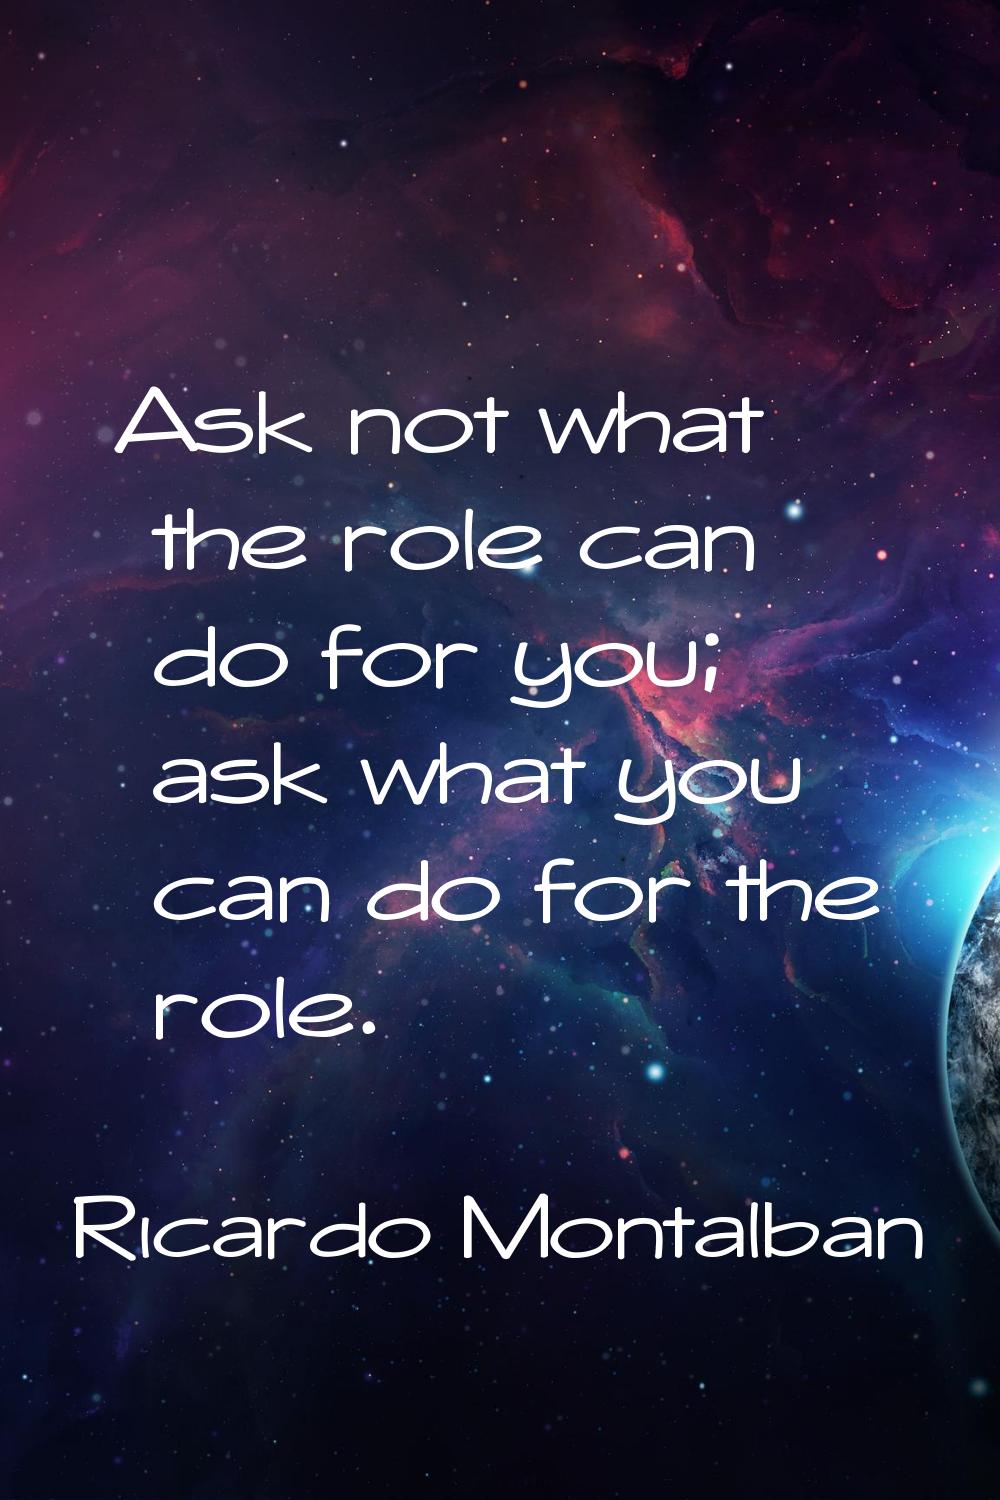 Ask not what the role can do for you; ask what you can do for the role.